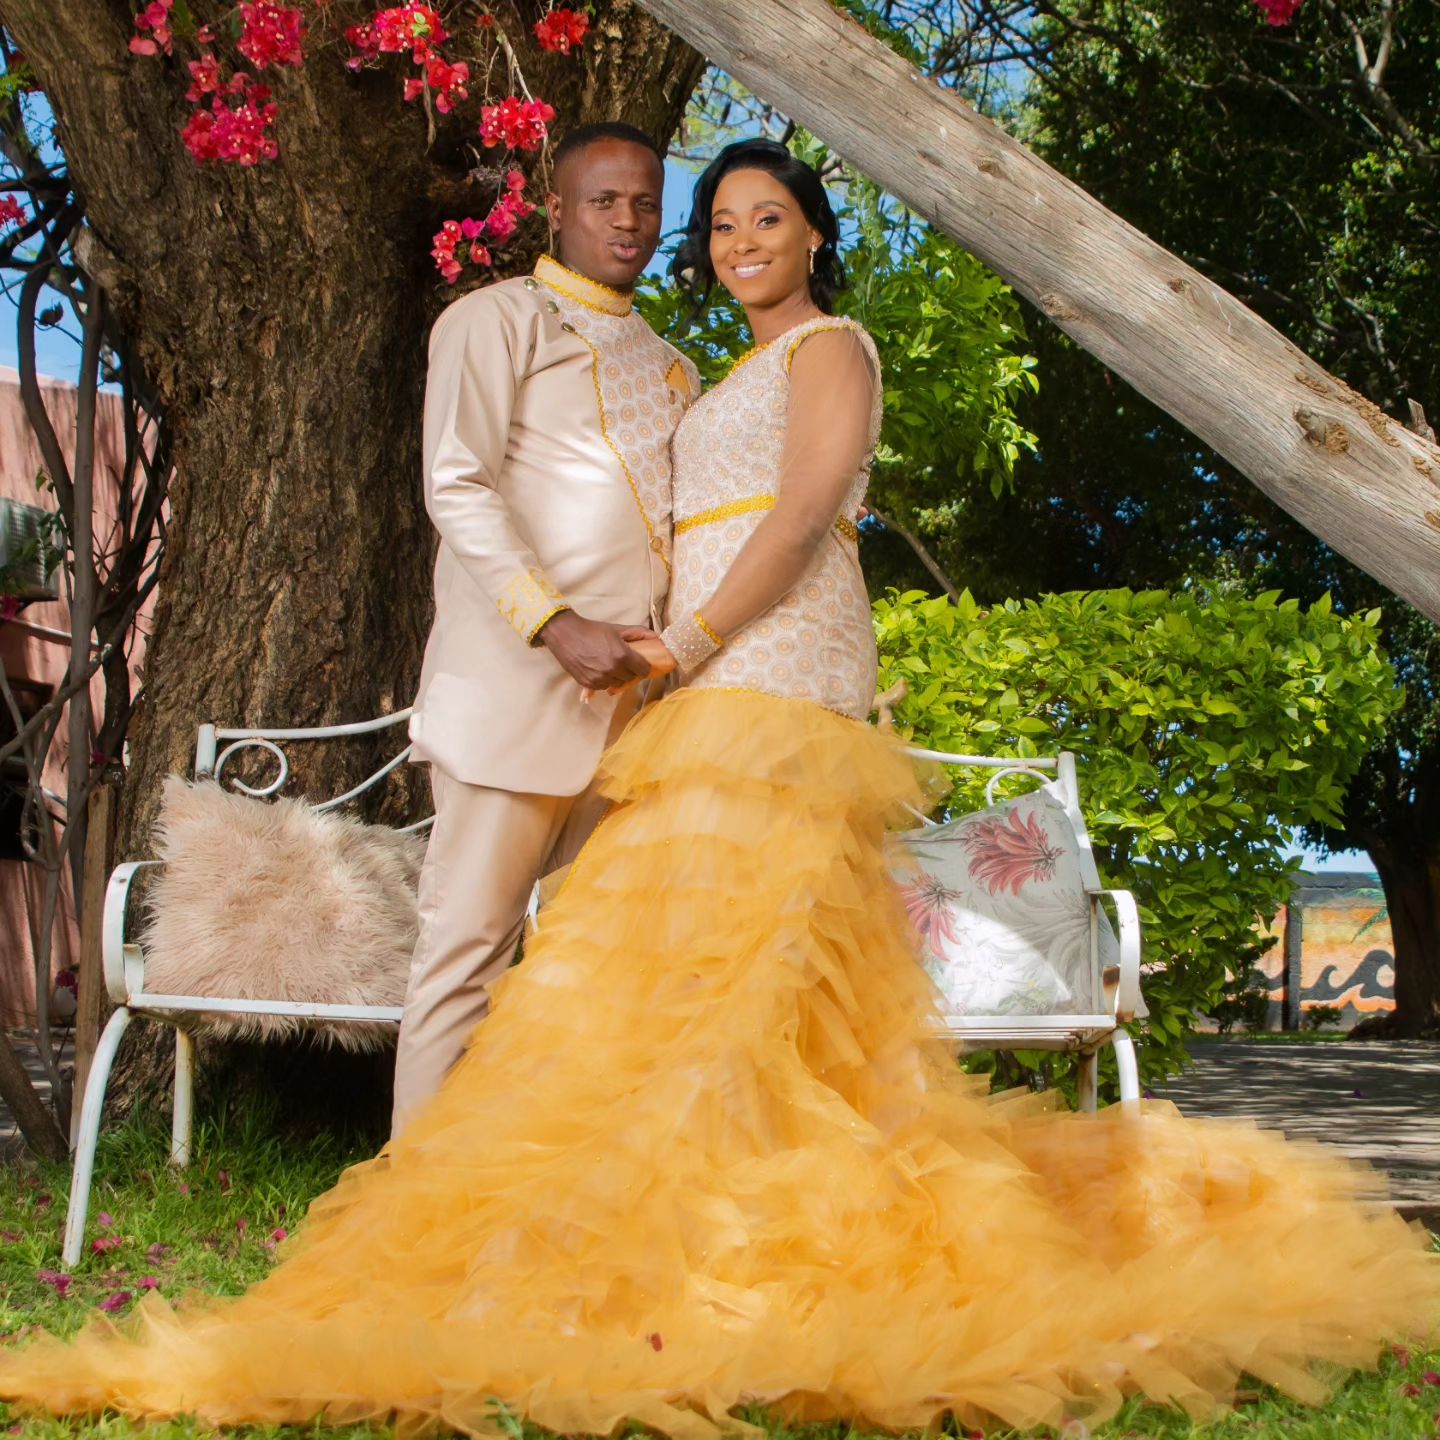 Amazing Tswana Dresses: A Fabric Steeped in History and Tradition 25